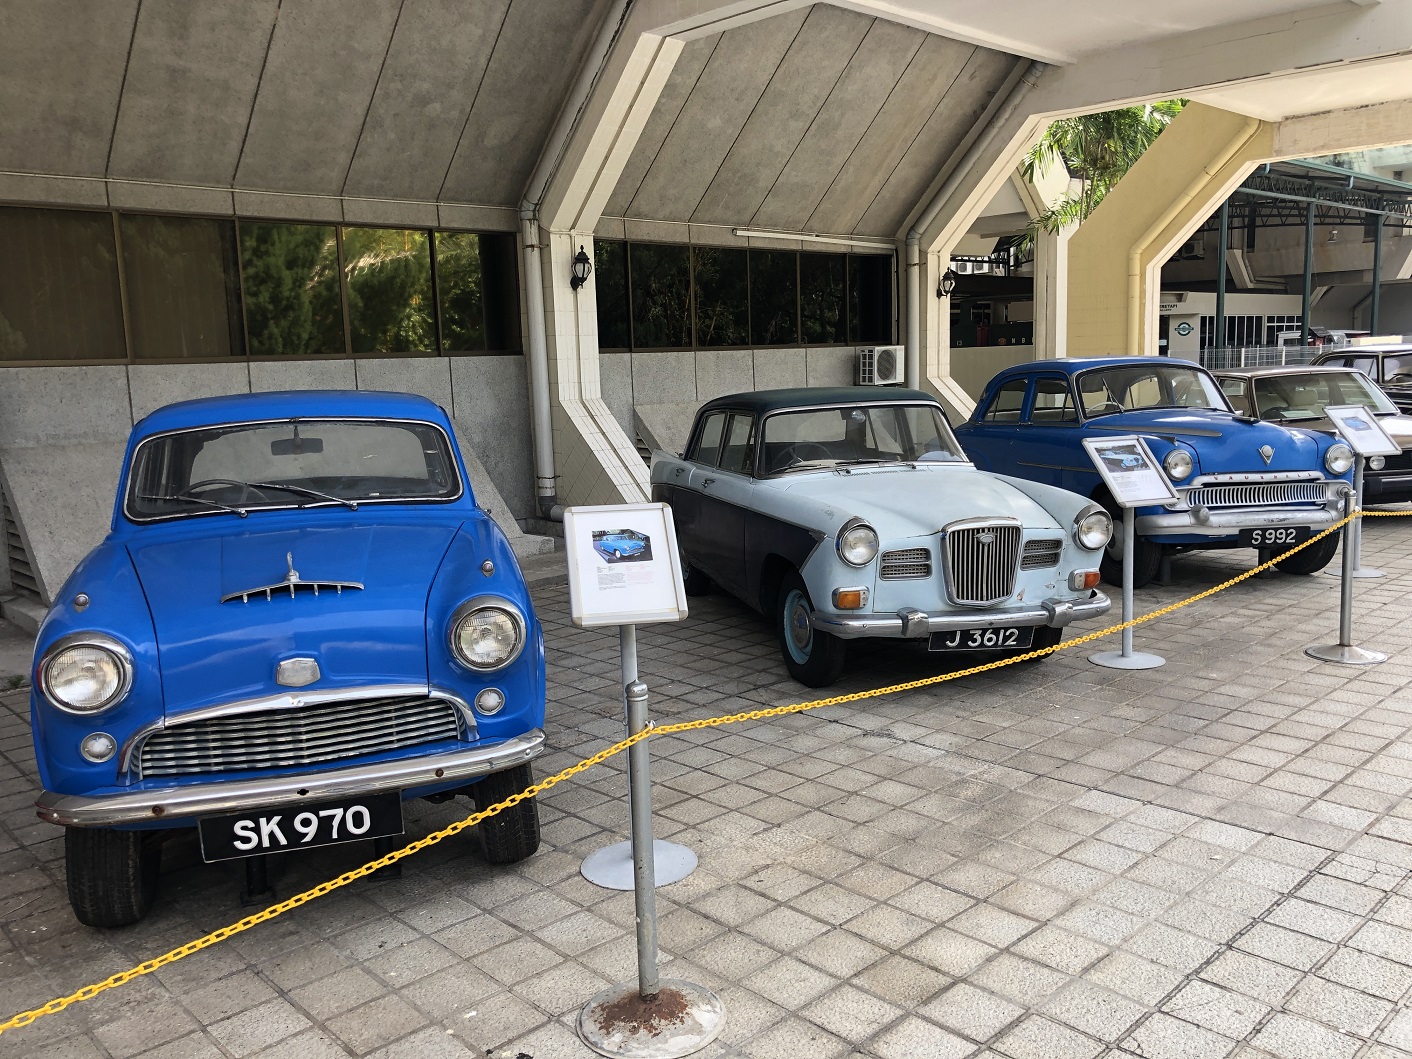  For the car anoraks - from left to right 1958 Austin A55, 1959 Wolseley 15/60 and 1956 Vauxhall Velox 